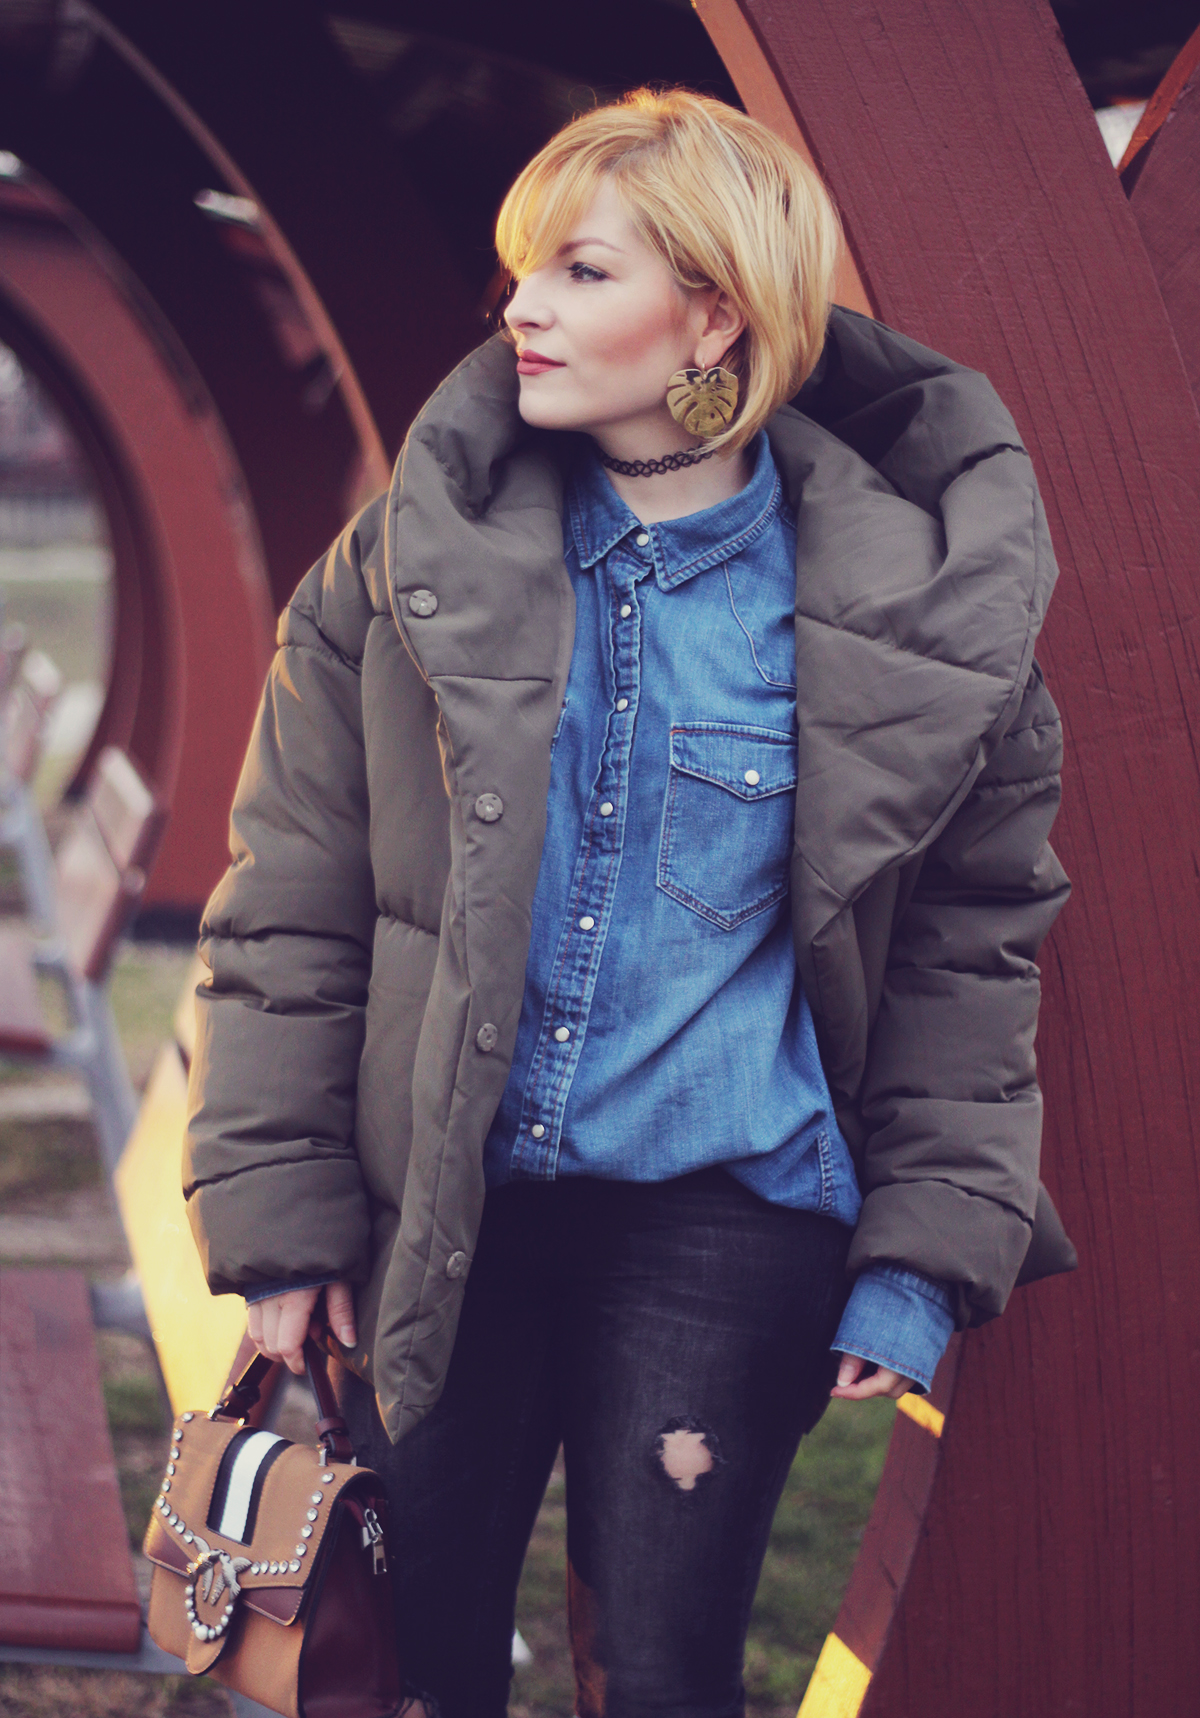 winter fashion, padded jacket, brown bag with bird detail, jeans, matte make-up, leaf earrings, choker